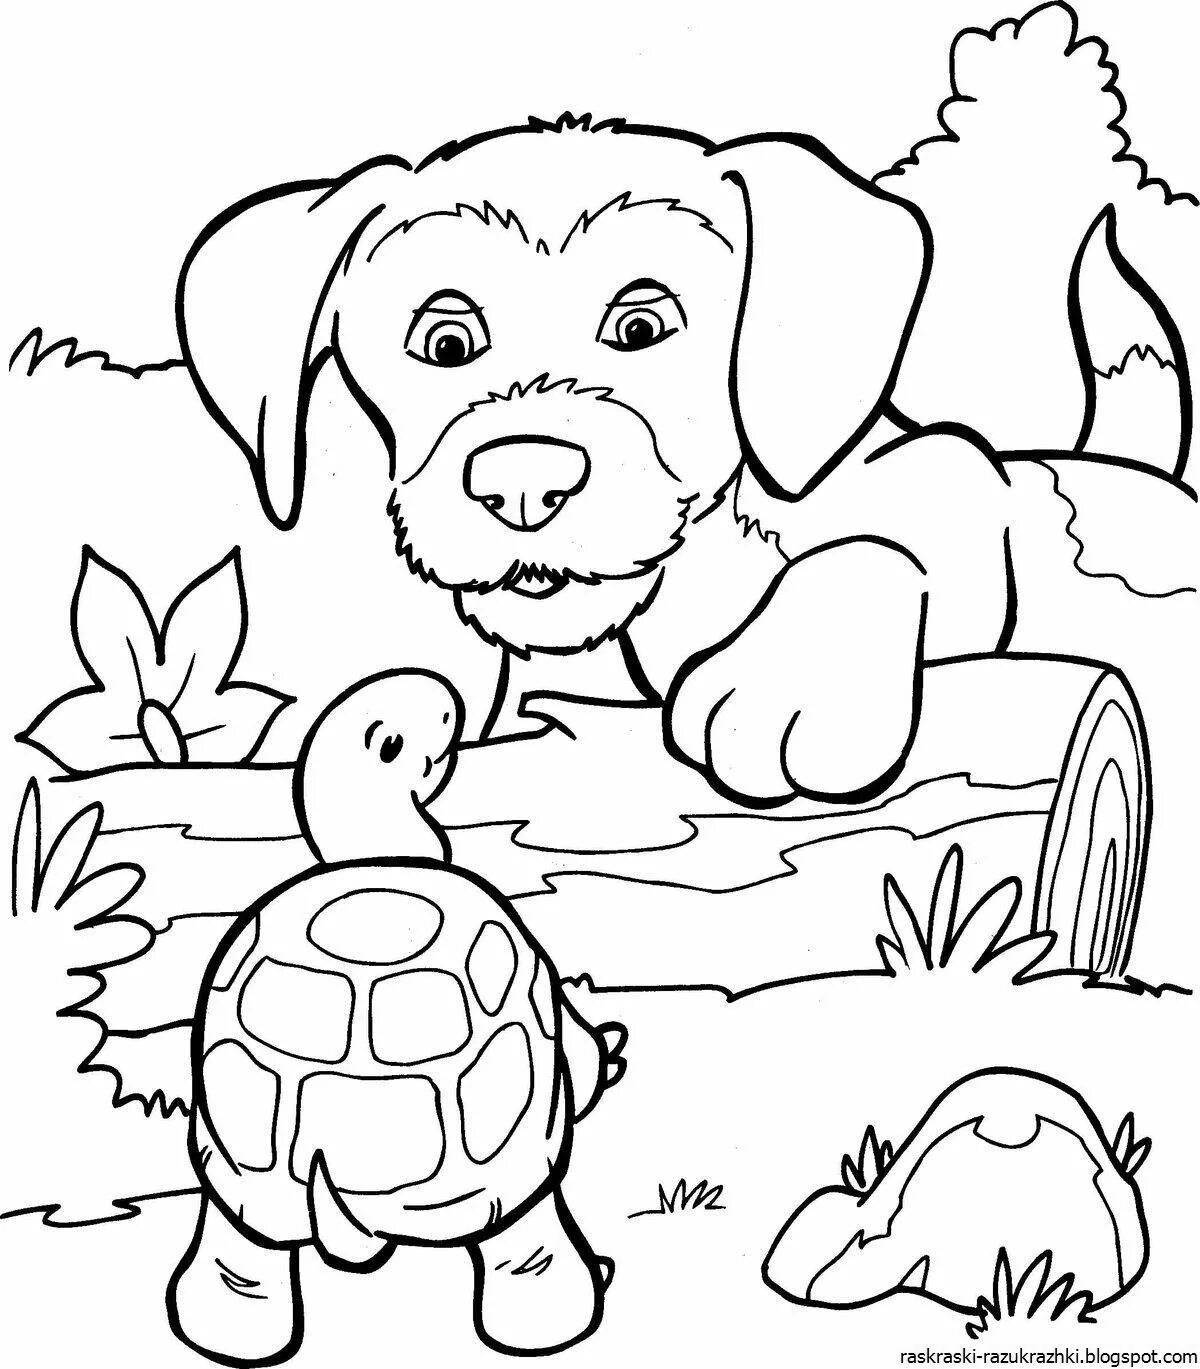 Shining Animals coloring book for kids 6-10 years old